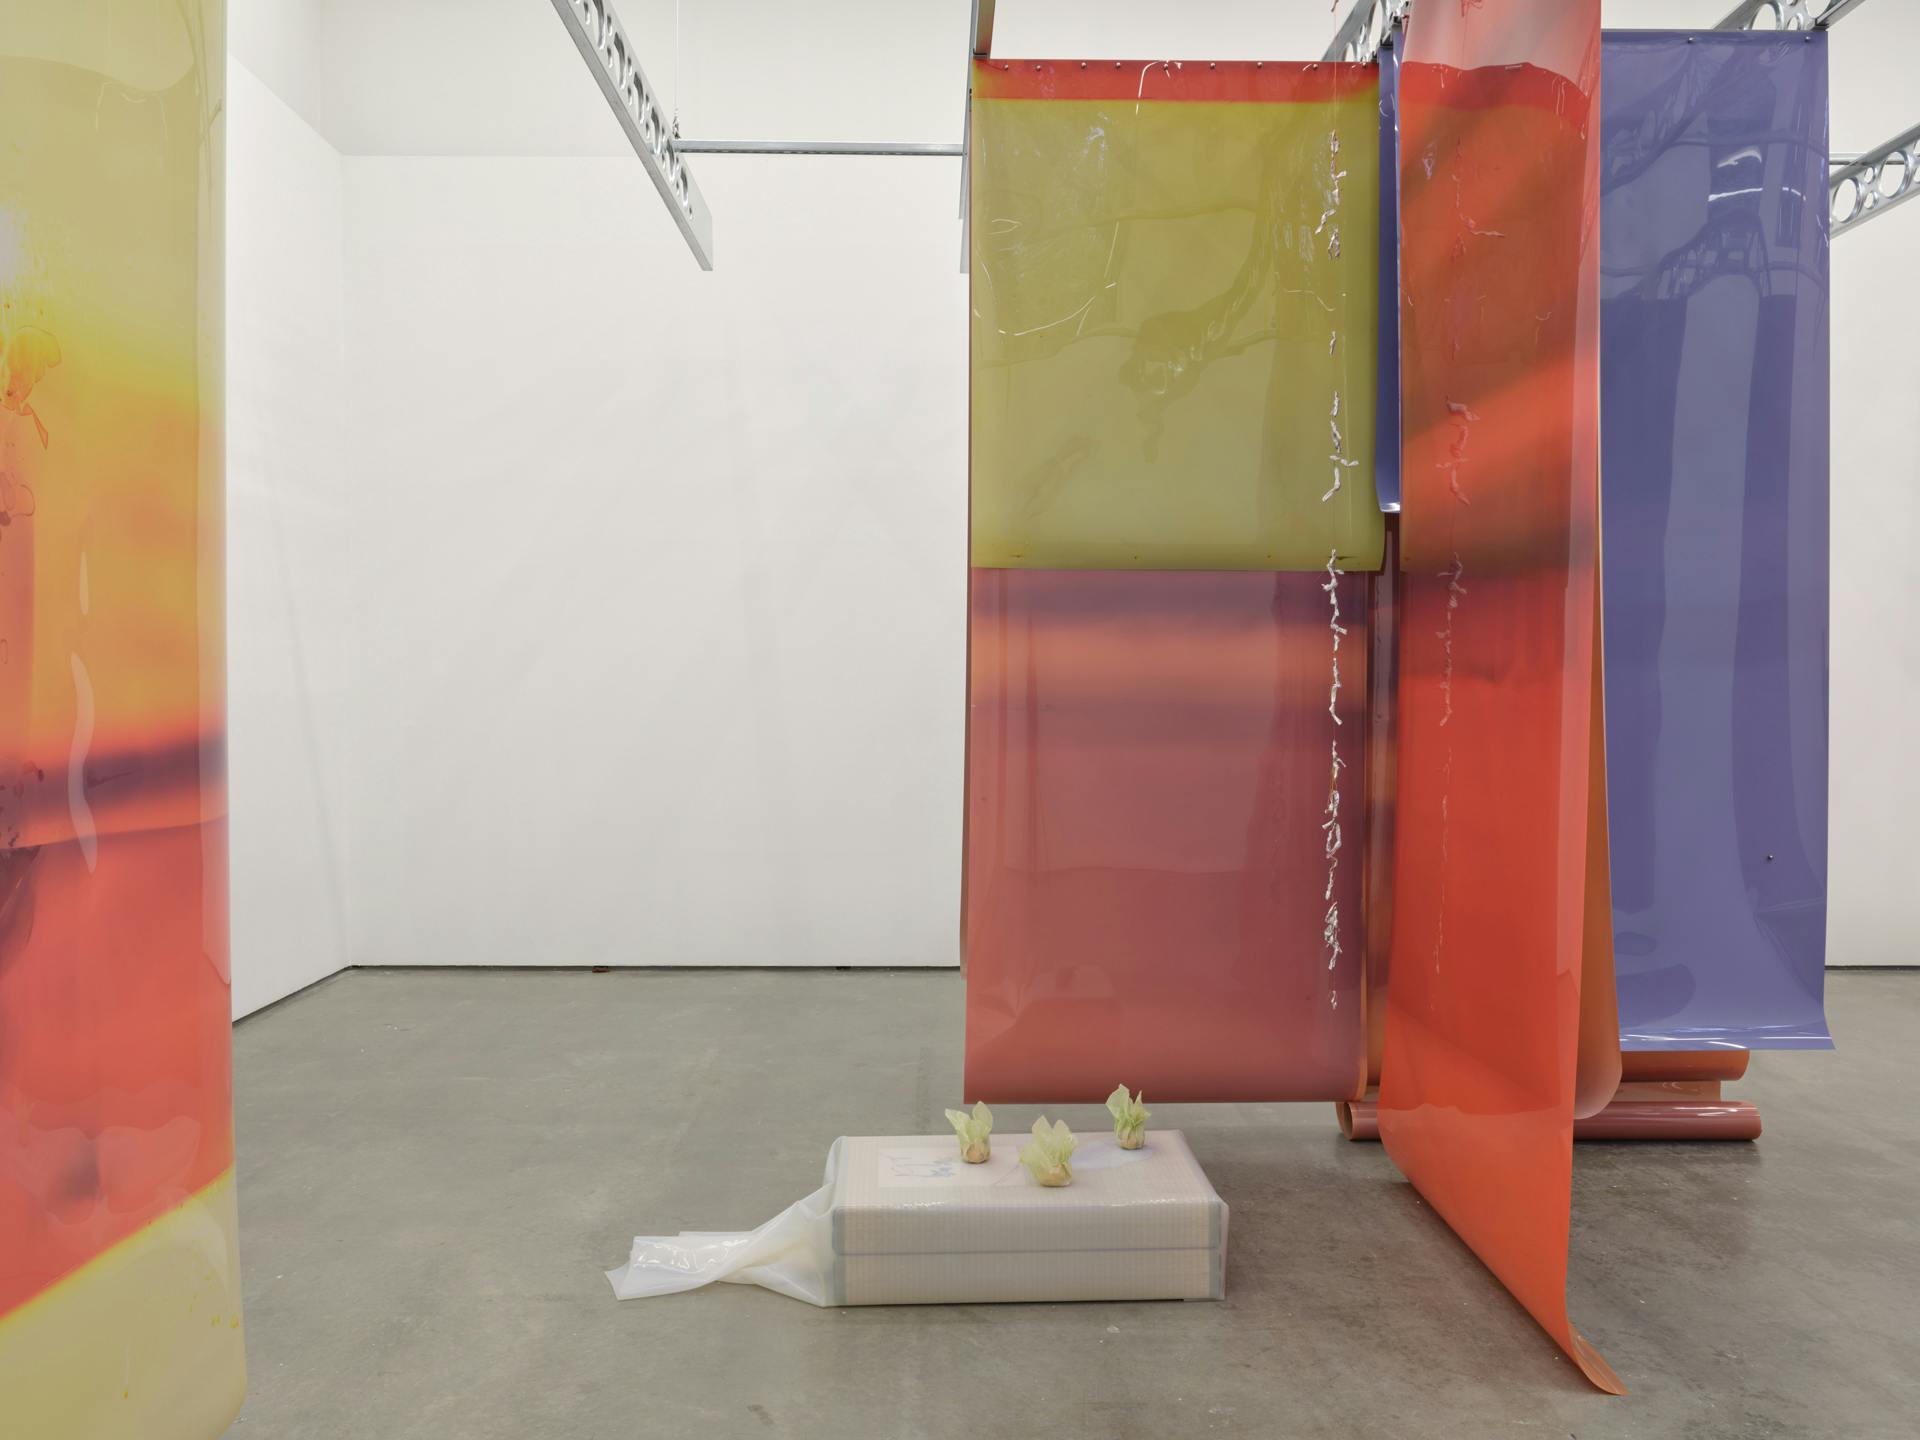 Long earth tone sheets of film of various colours suspended from metal ceiling beams. A small box supporting three fruit is visible between two perpendicular sheets of film.